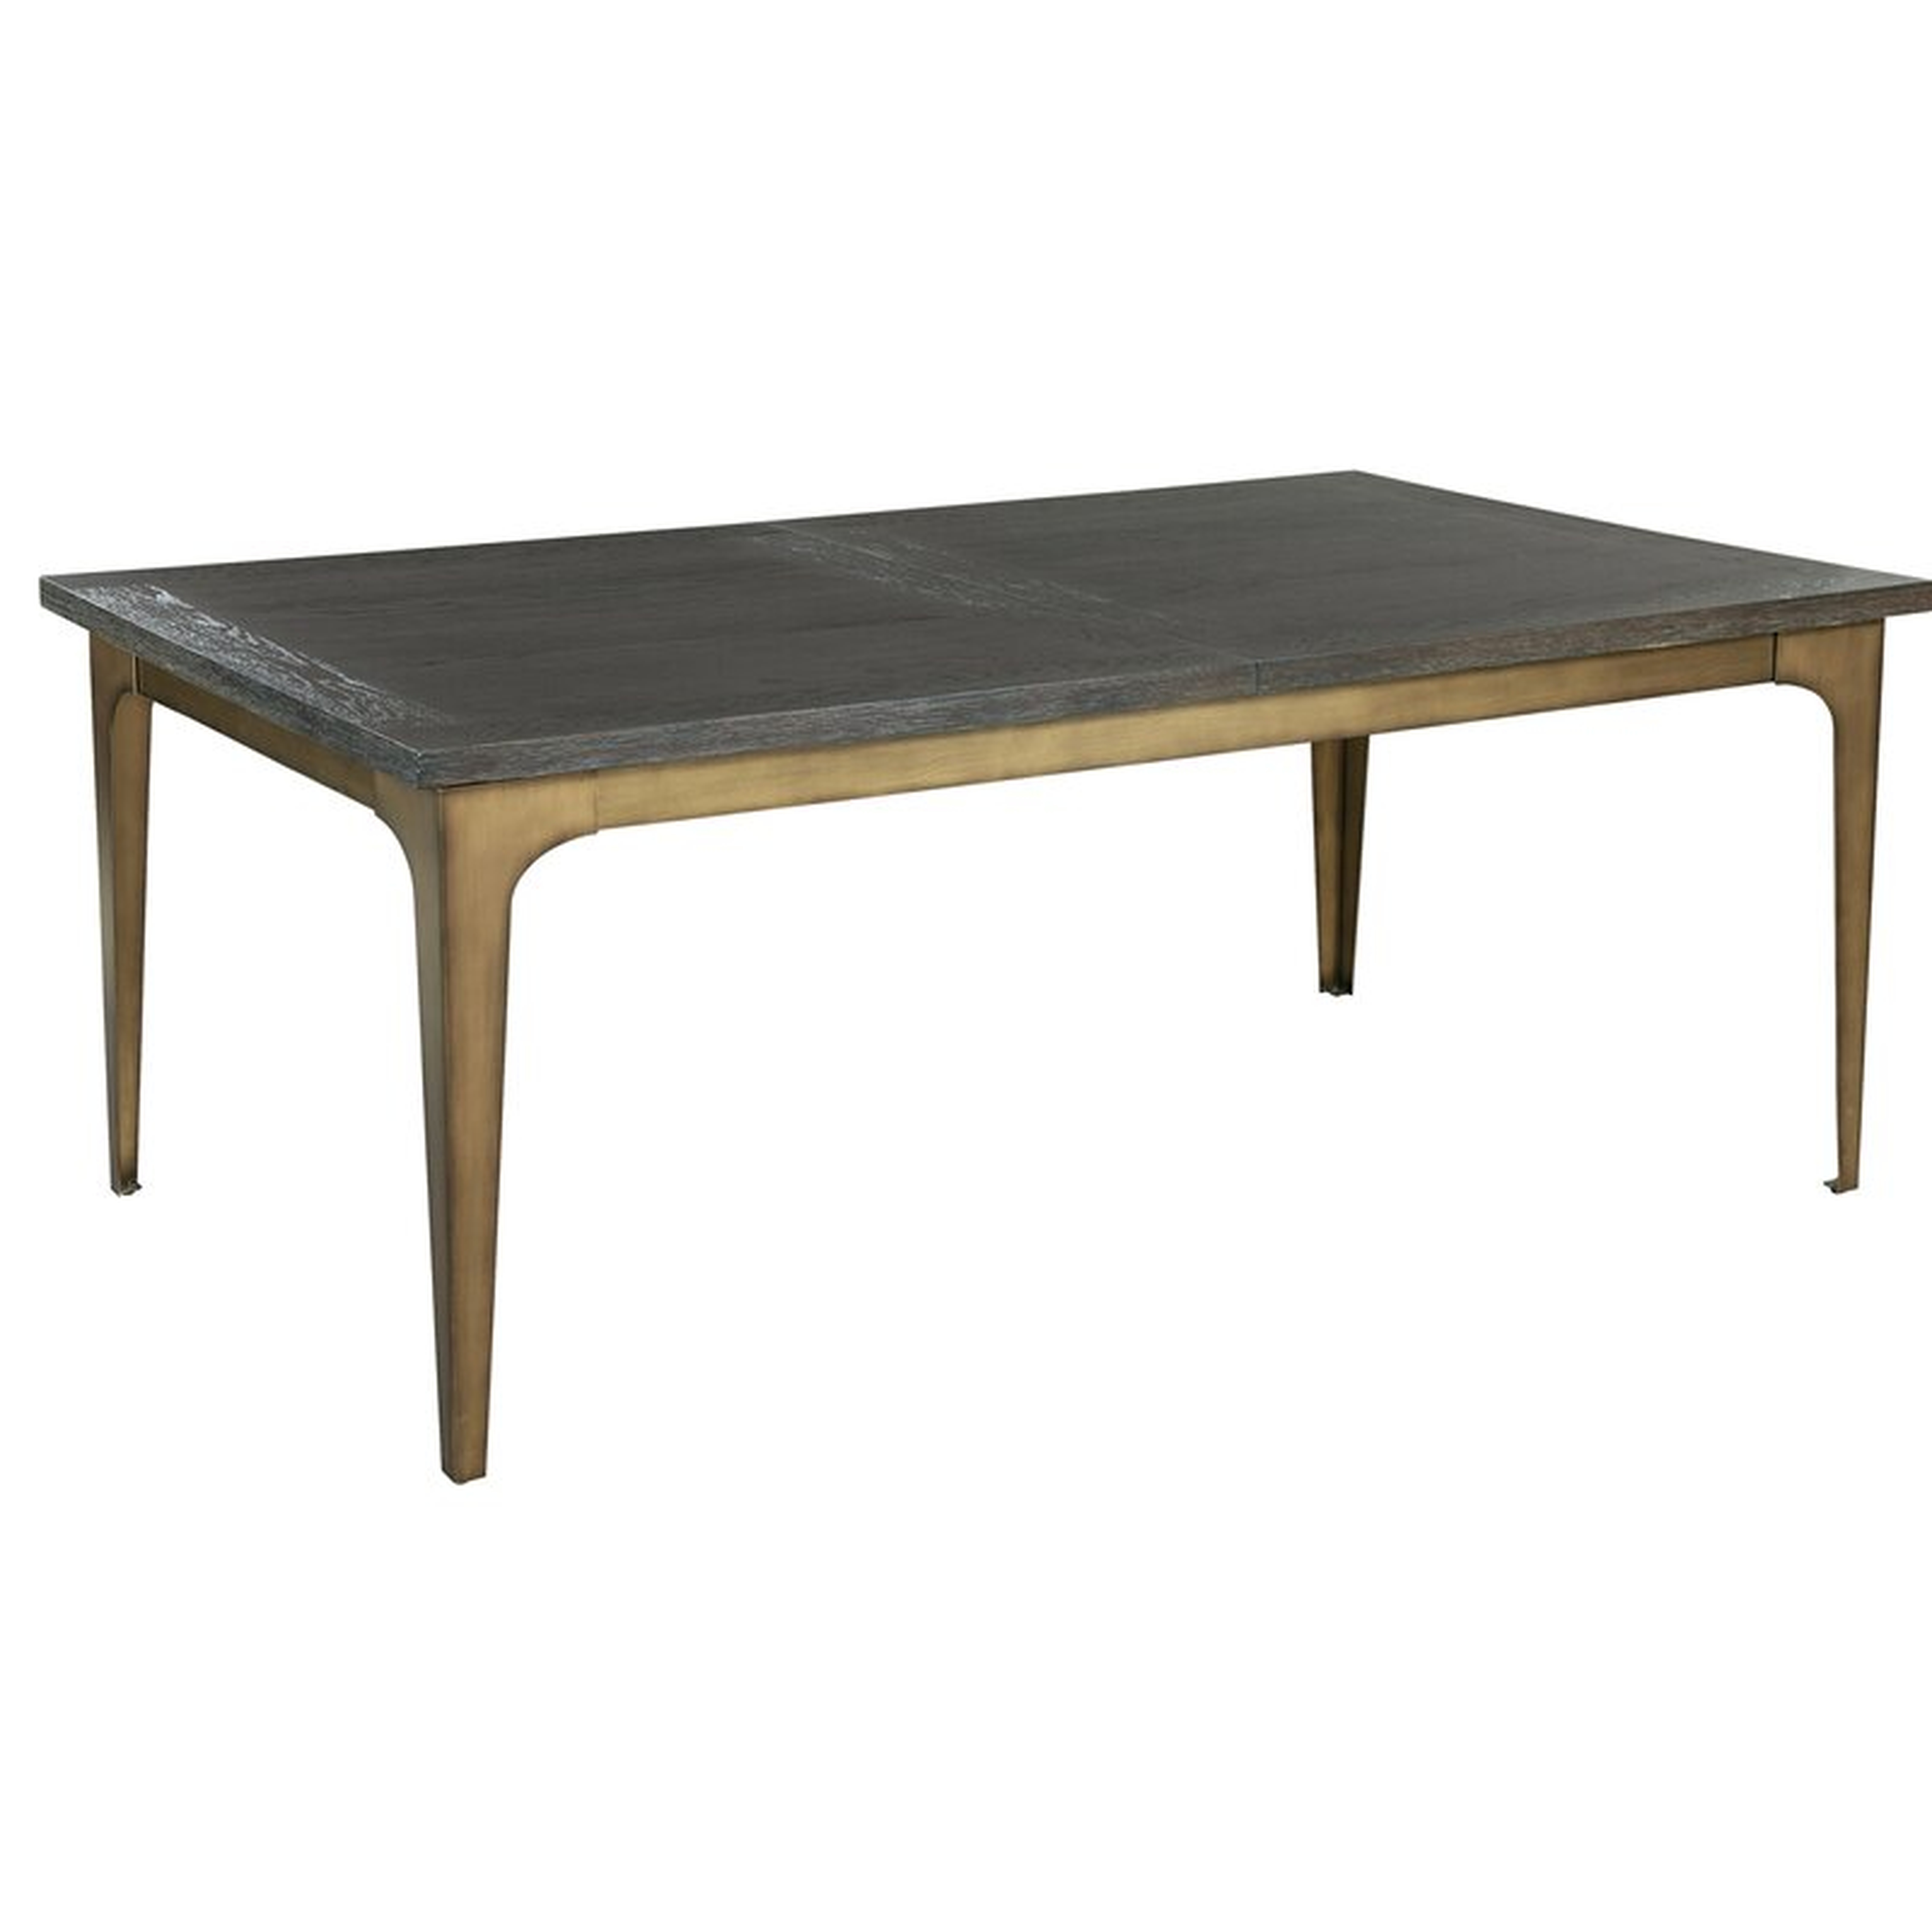 Hekman Extendable Dining Table - Perigold